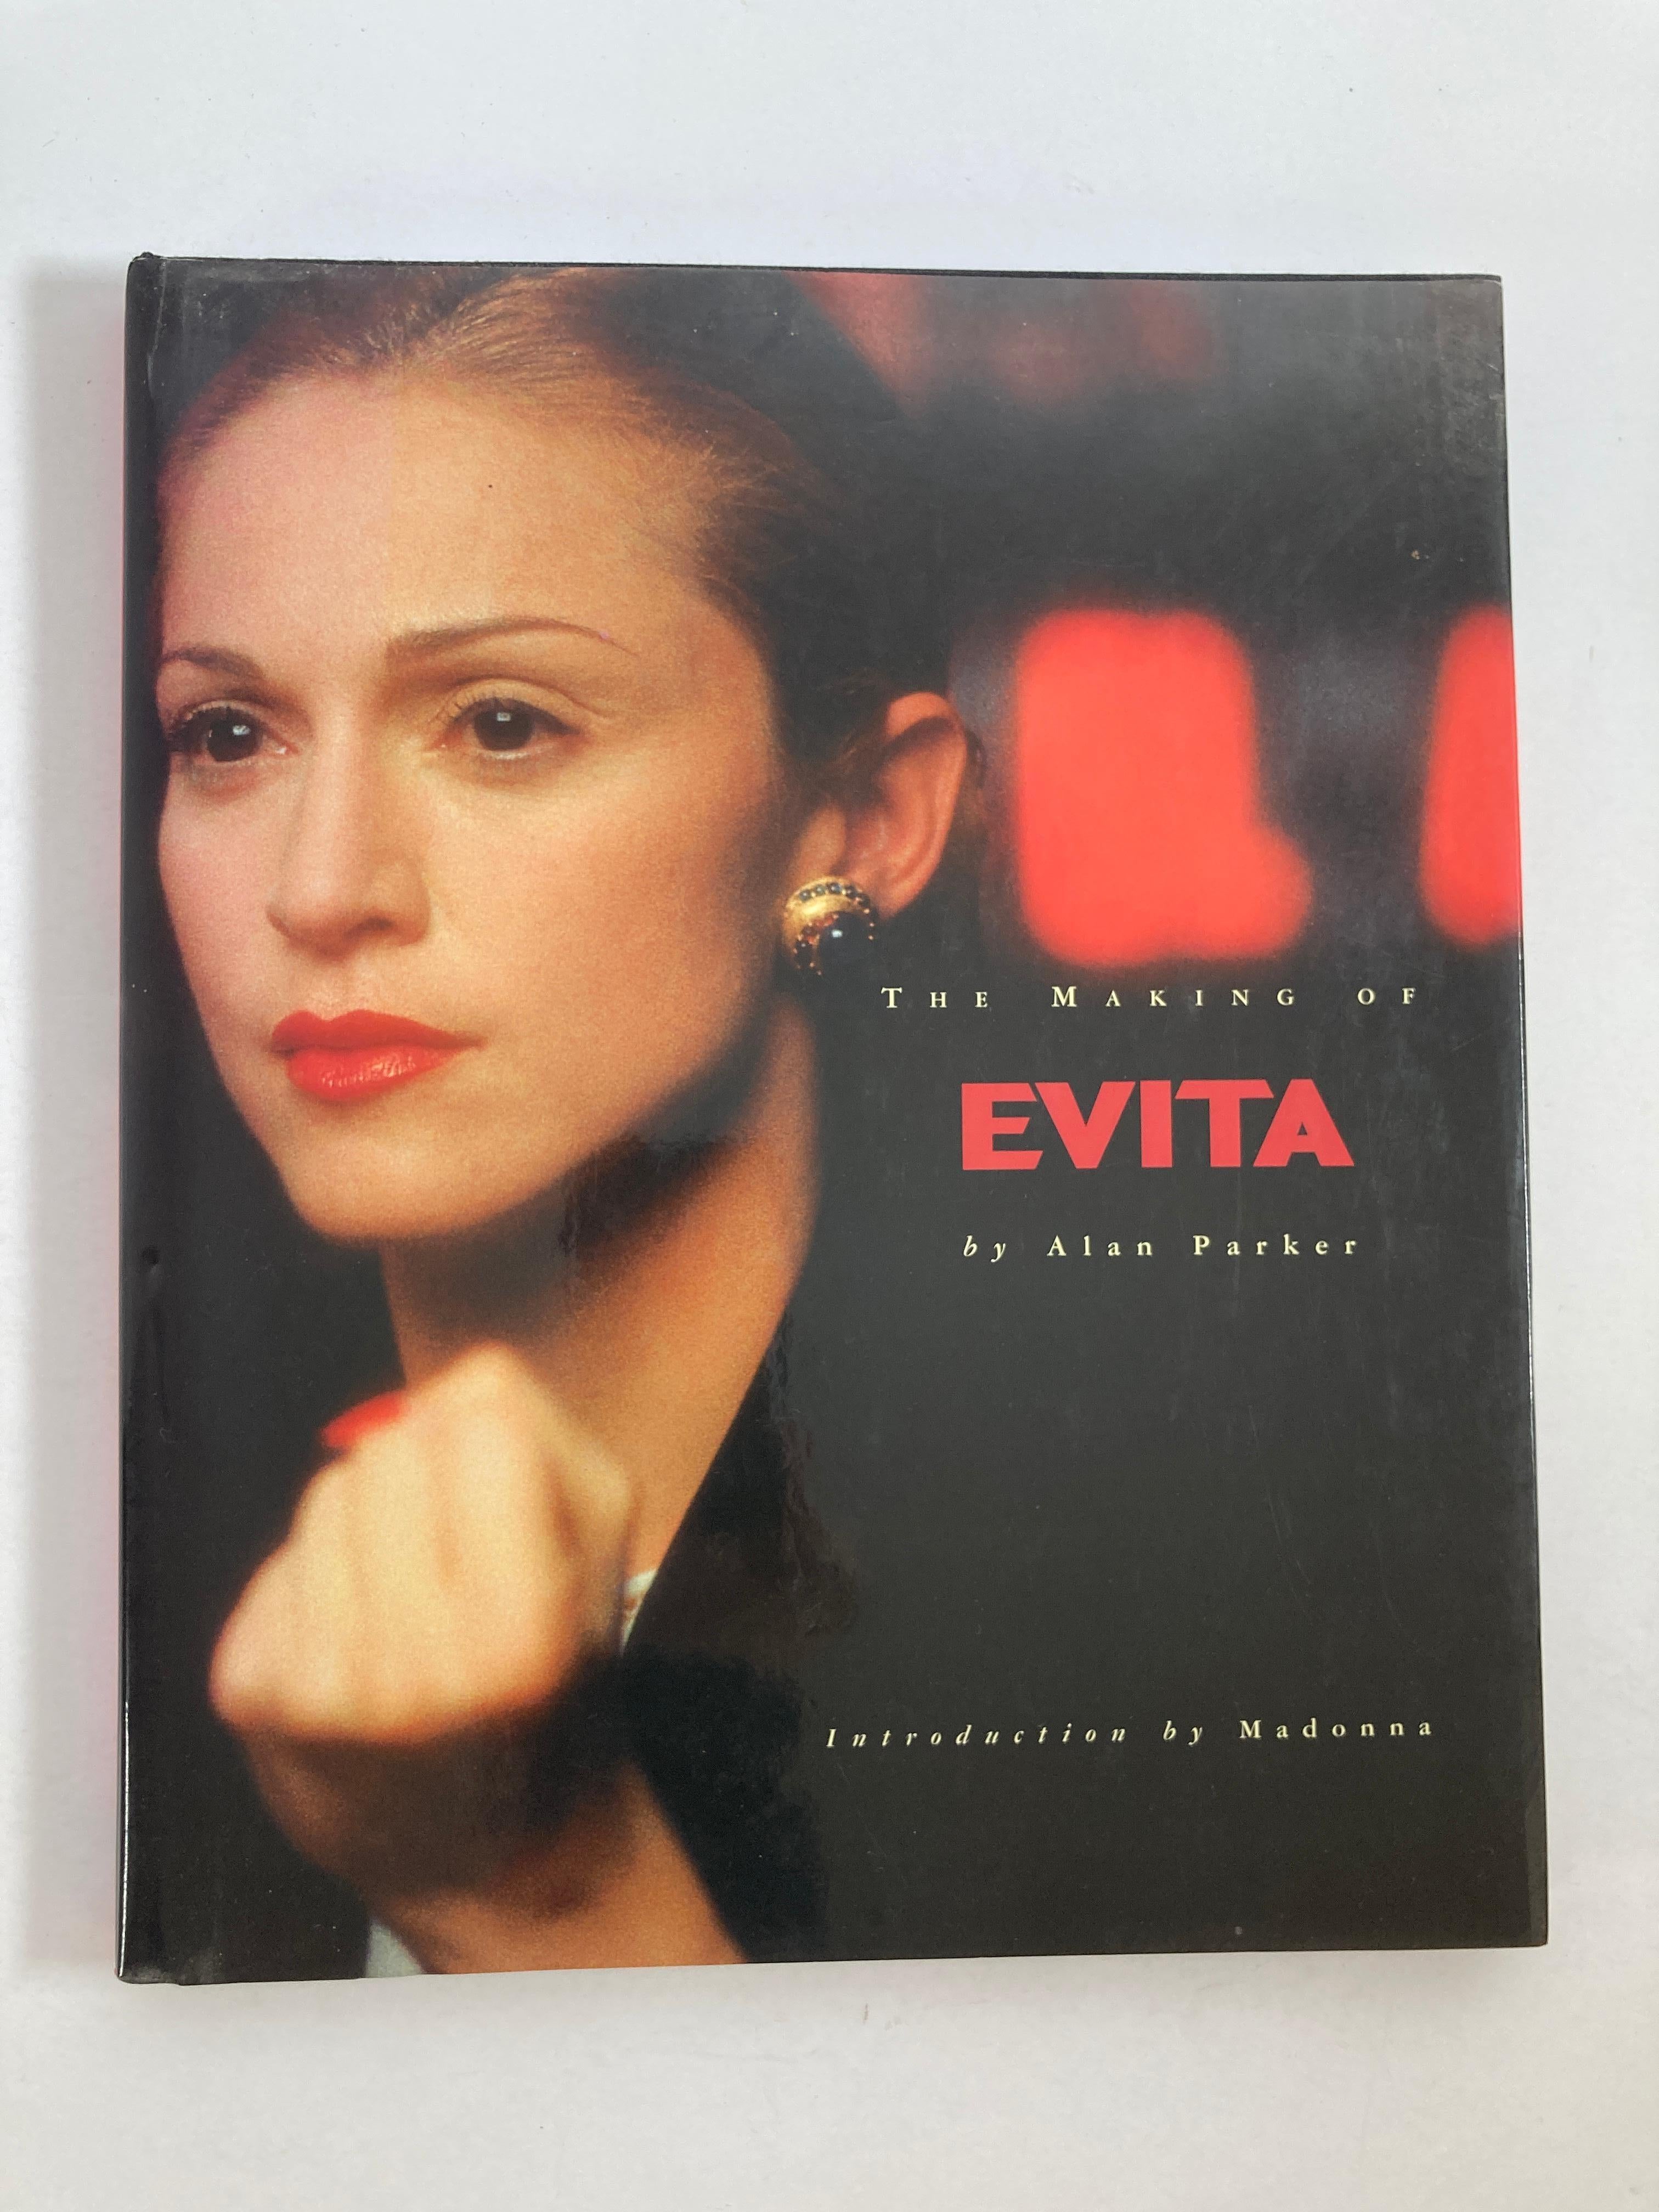 “The making of Evita Book by Alan Parker” coffee table book
Featuring an introduction by Madonna, the film's star, a behind-the-scenes account of the making of the forthcoming motion picture by its director features more than a hundred movie stills